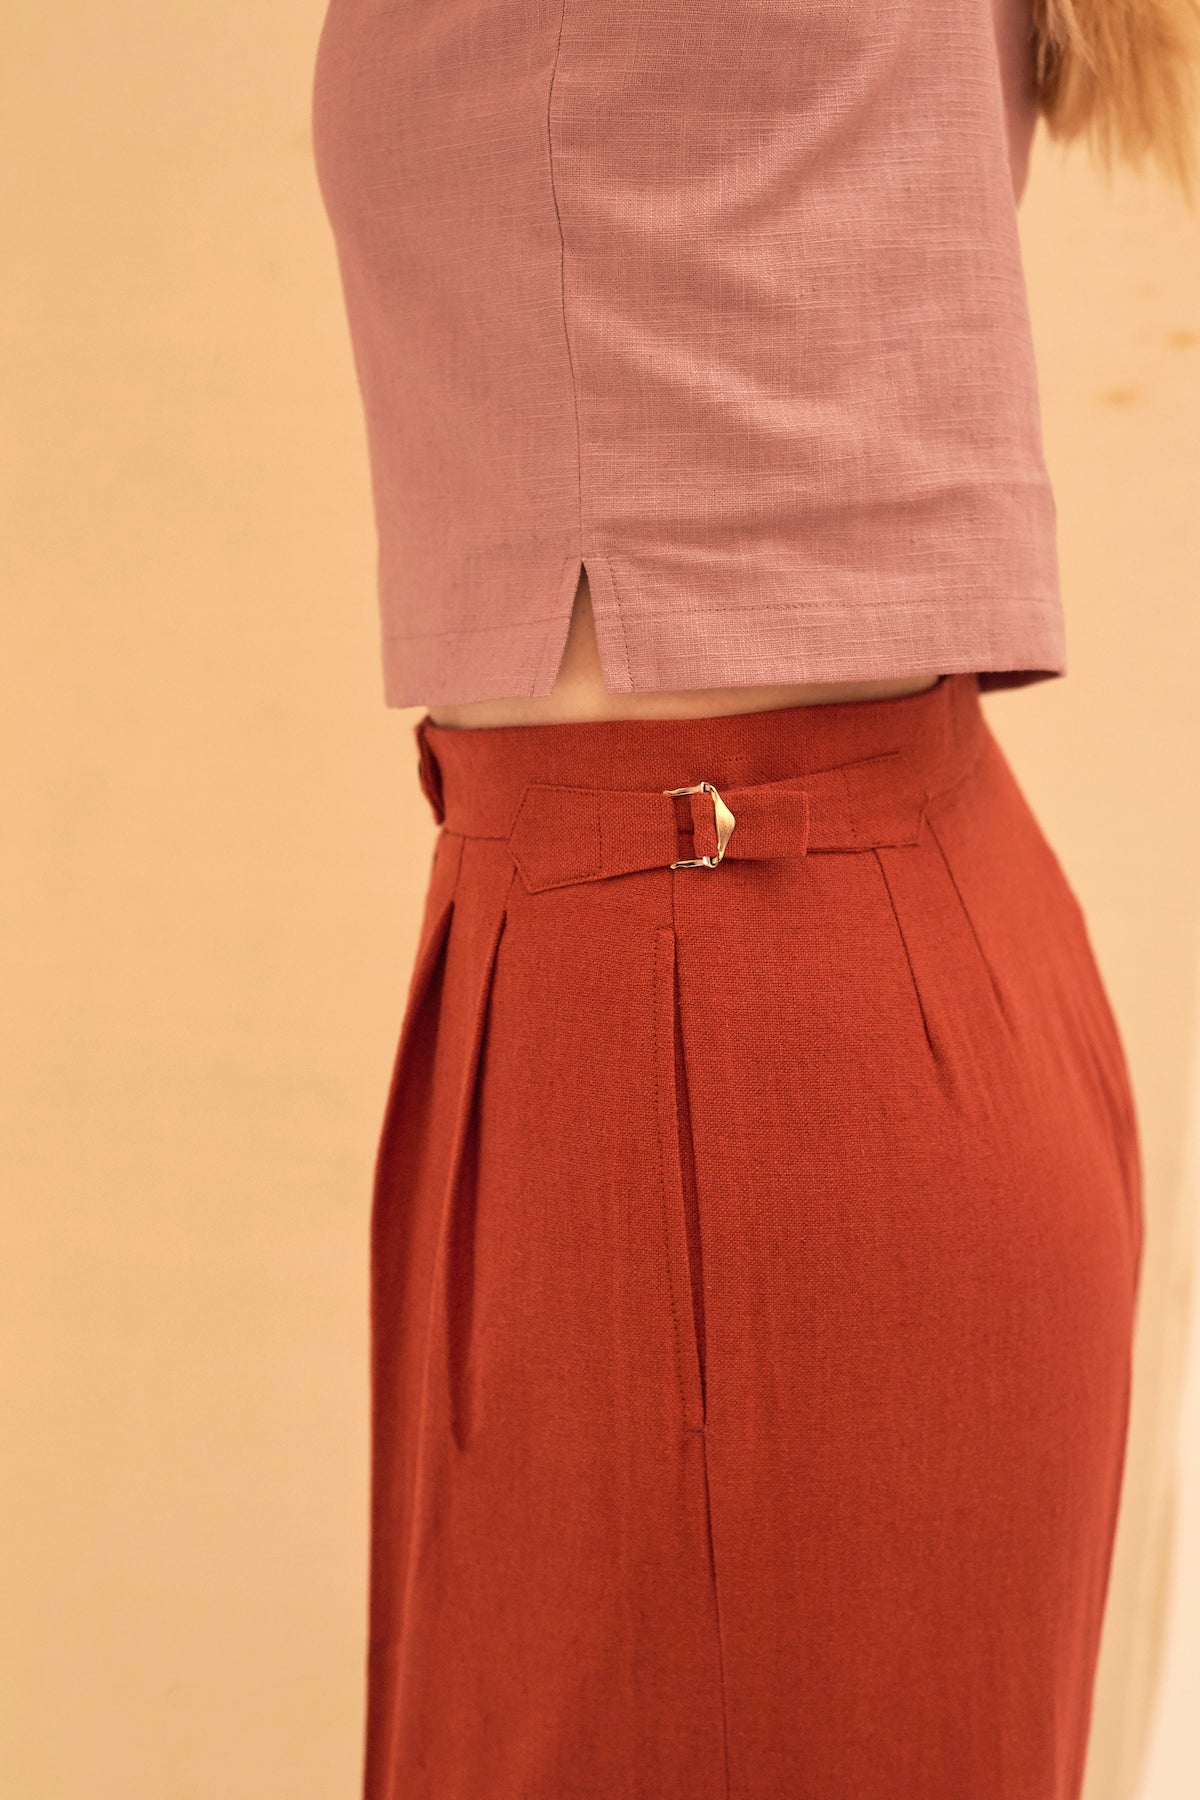 Plain Pleated Pants Fancy Ladies Trousers, Size: 30.0 at Rs 550/piece in  New Delhi